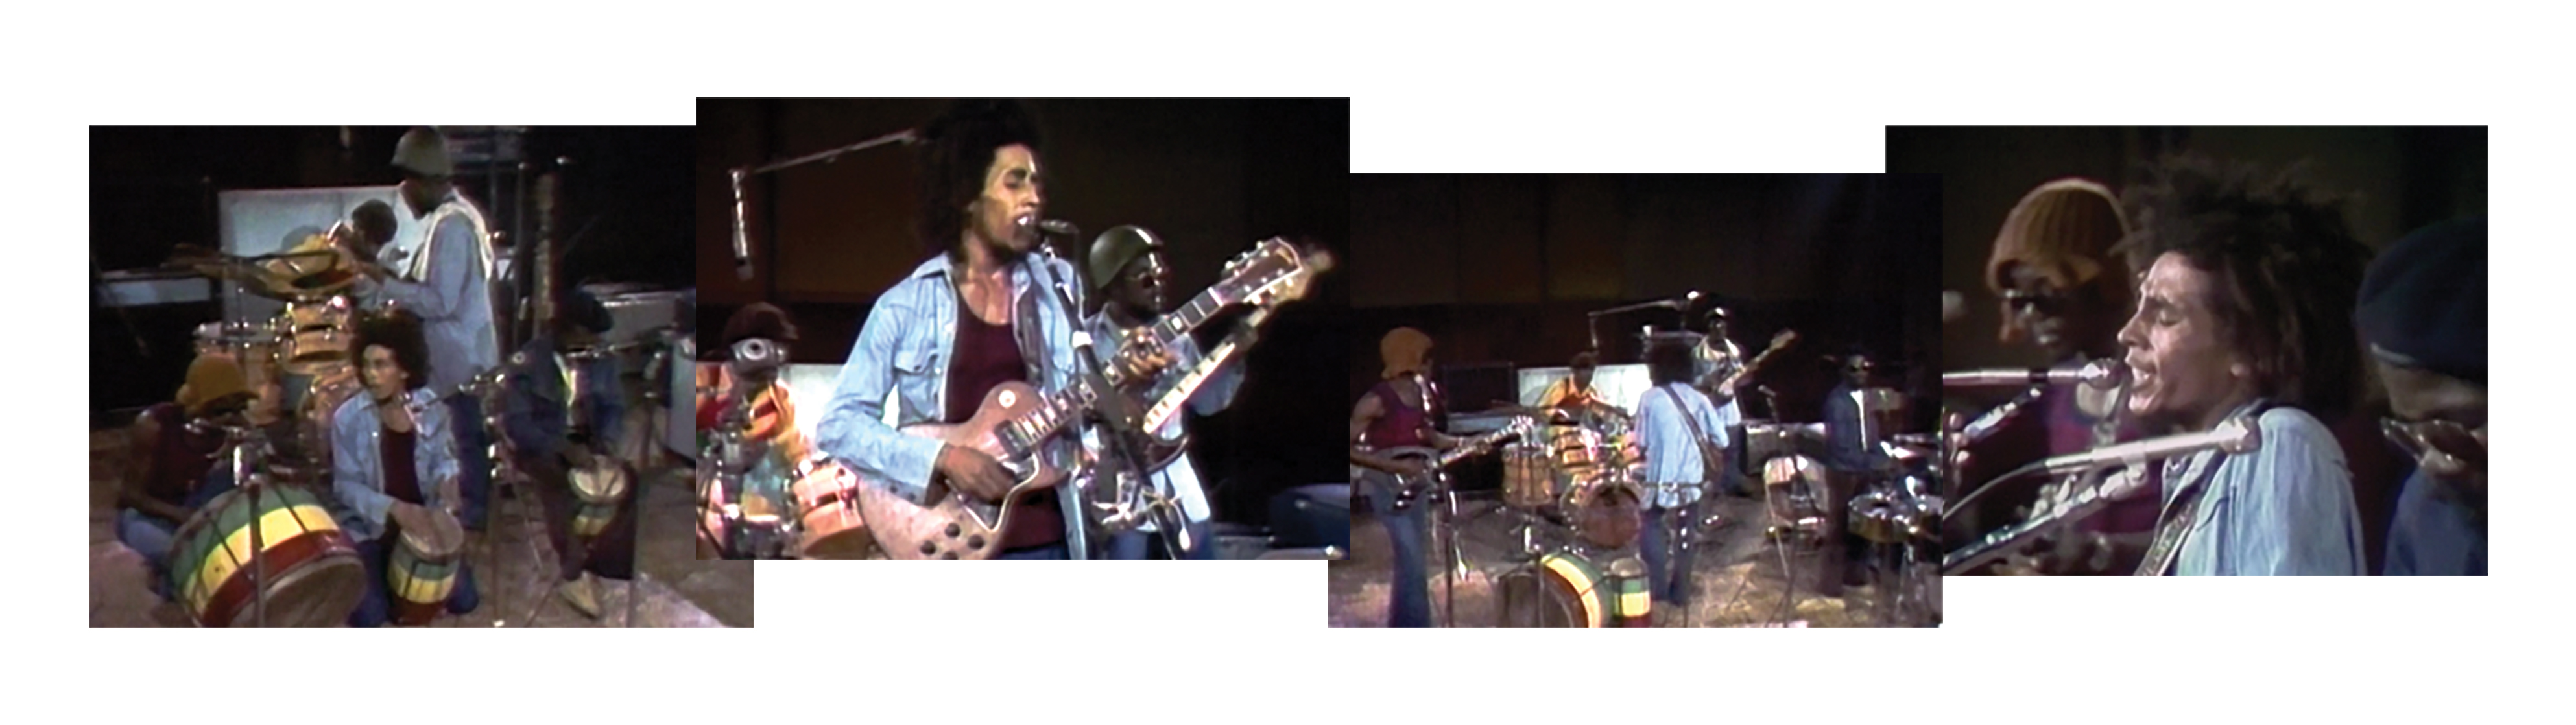 BOB MARLEY & THE WAILERS: THE CAPITOL SESSION ’73’ NOW STREAMING